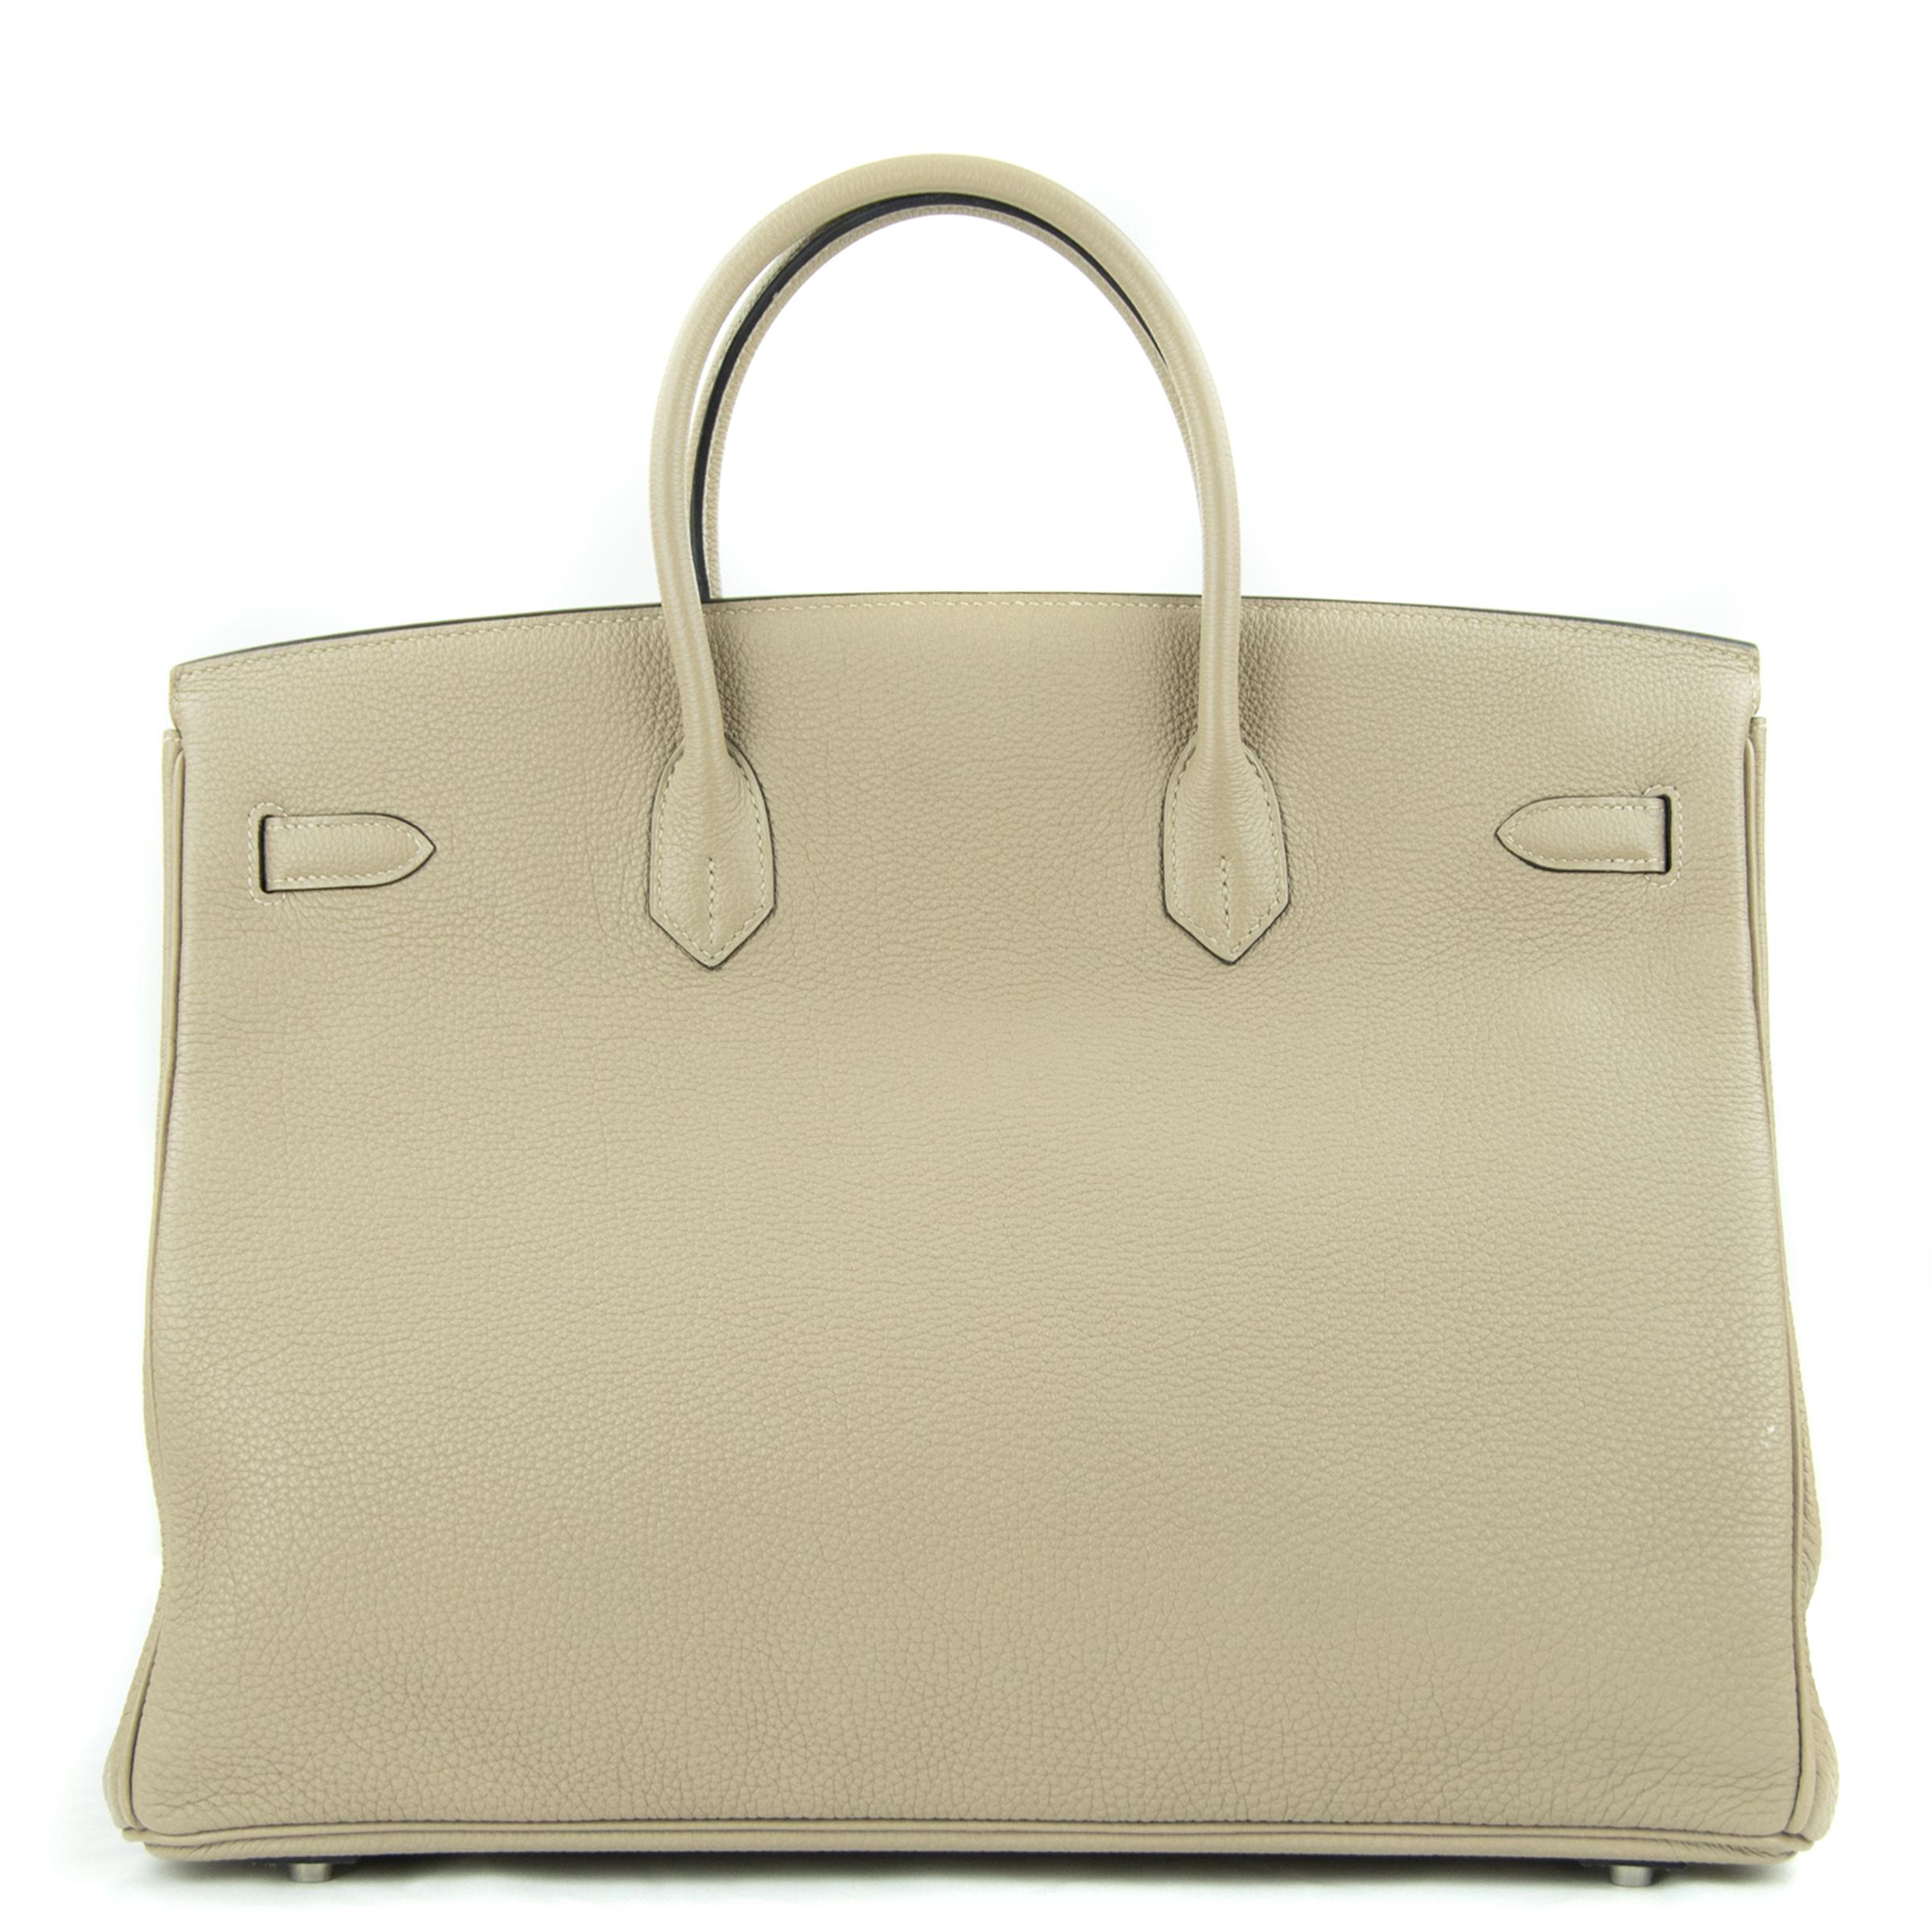 Hermes 40cm Birkin bag in Gris Tourterelle Togo. This iconic special order Hermes Birkin bag is timeless and chic. Fresh and crisp with palladium hardware.

    Condition: New or Never Used
    Made in France
    Bag Measures: 40cm (15.7